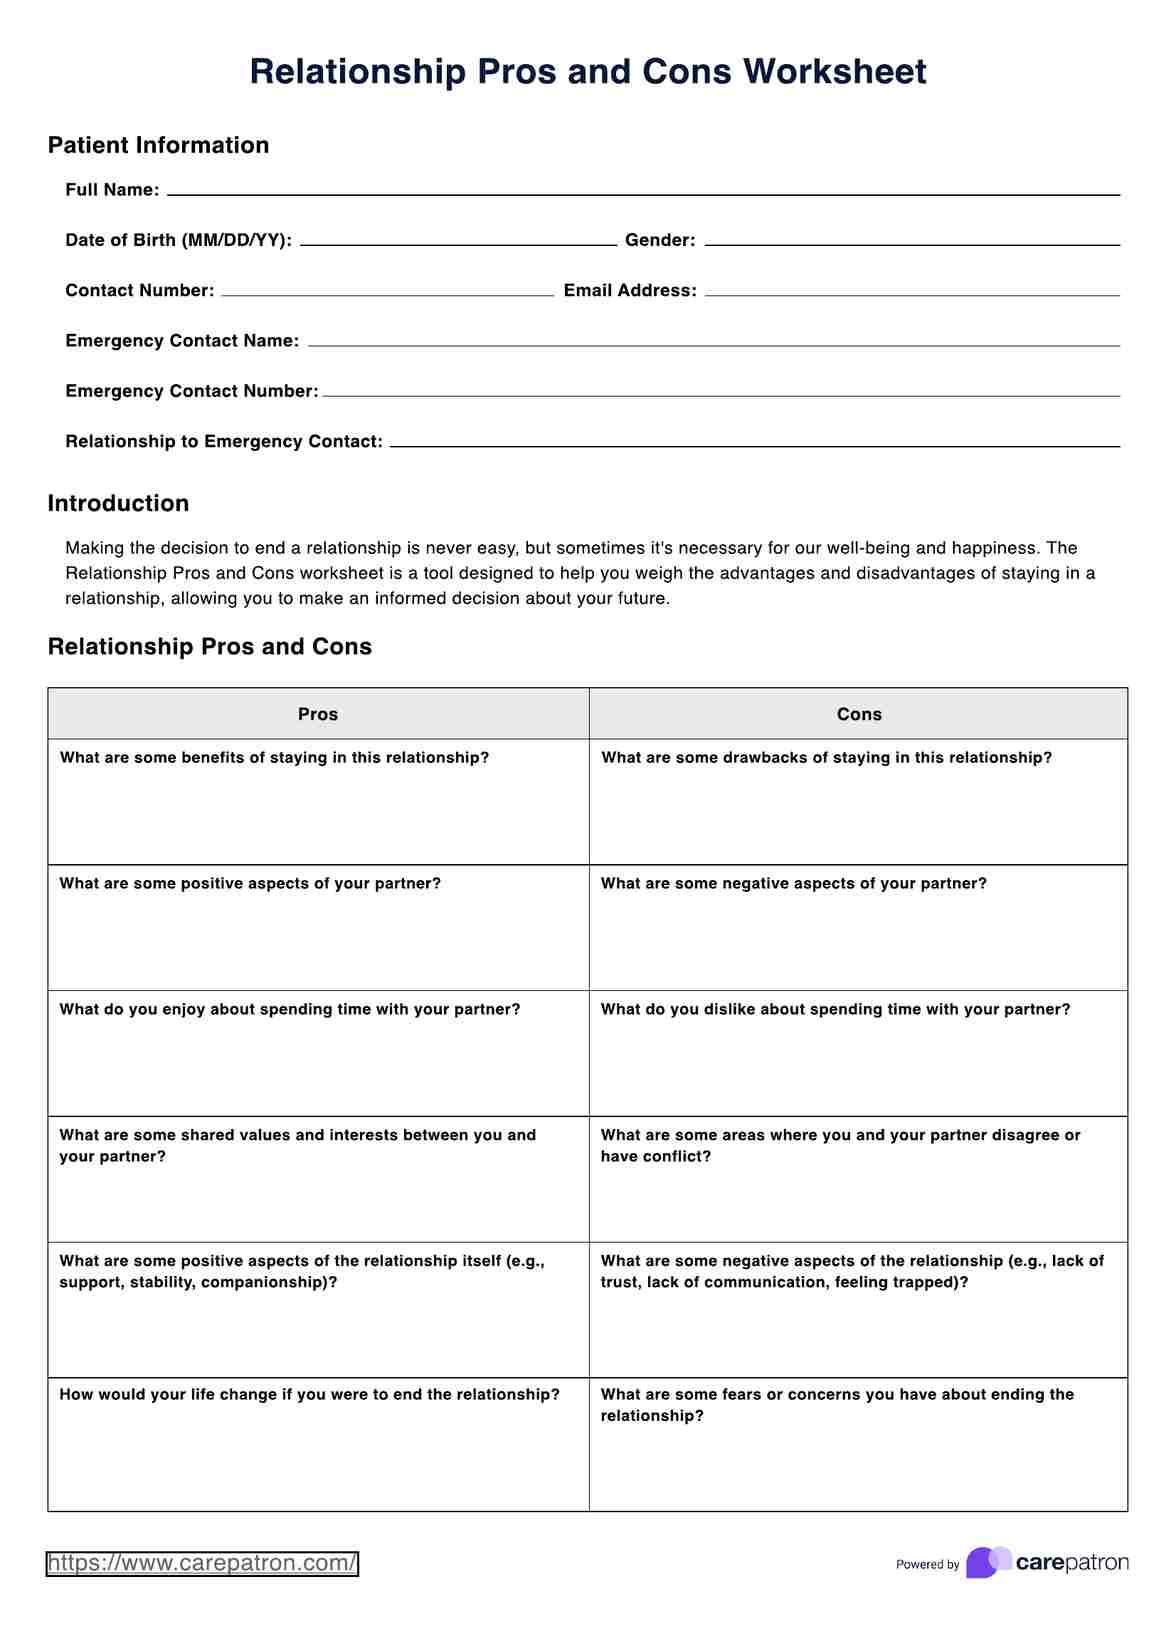 Relationship Pros and Cons Worksheet PDF Example